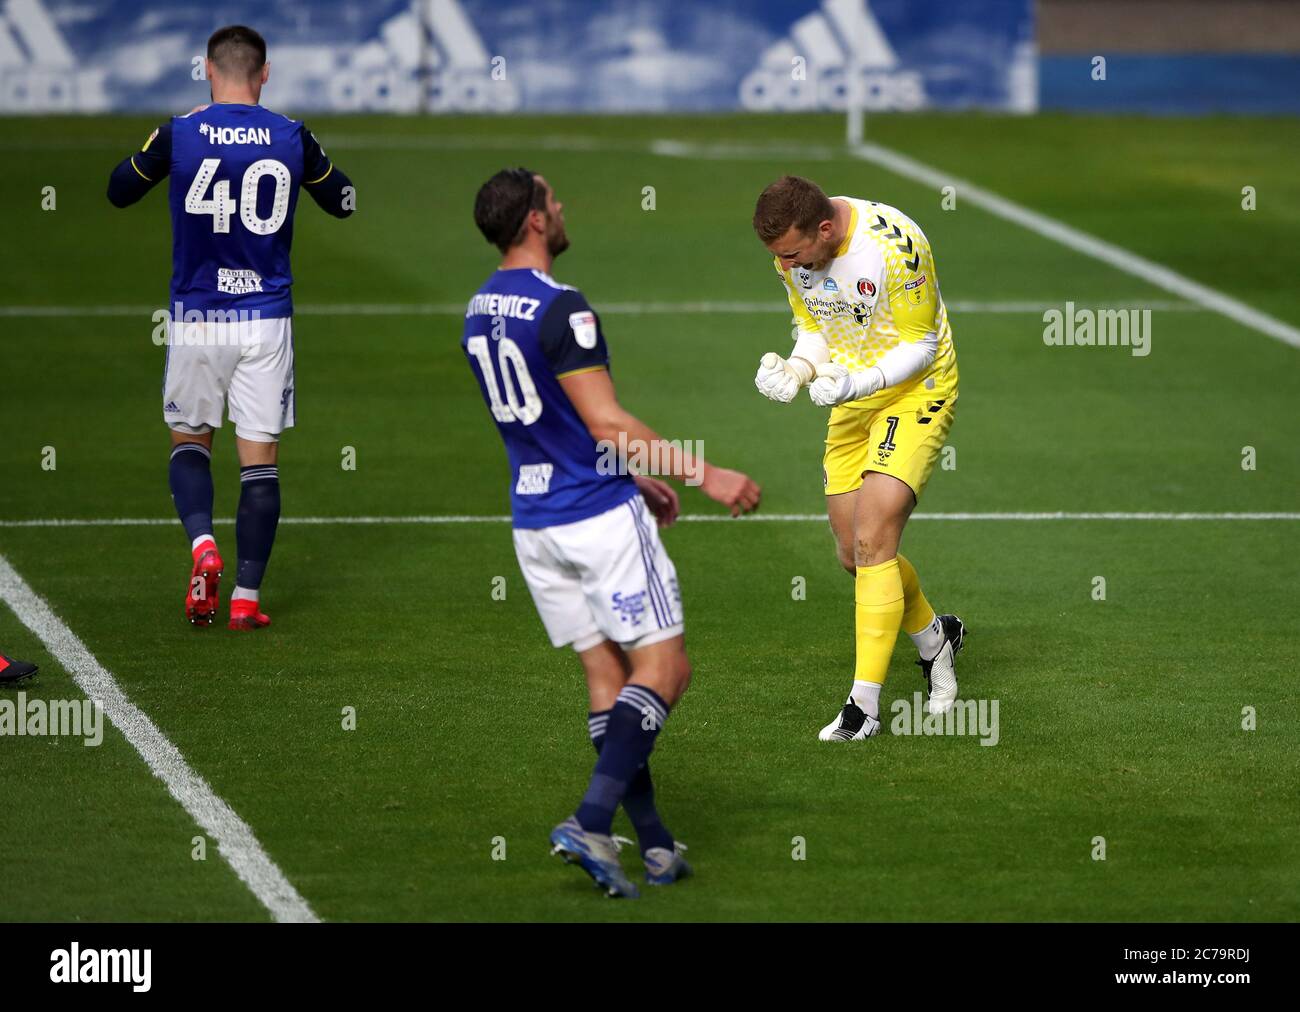 Charlton Athletic goalkeeper Dillon Phillips celebrates after saving a penalty from Birmingham City's Scott Hogan (left) during the Sky Bet Championship match at St Andrew's Trillion Trophy Stadium, Birmingham. Stock Photo